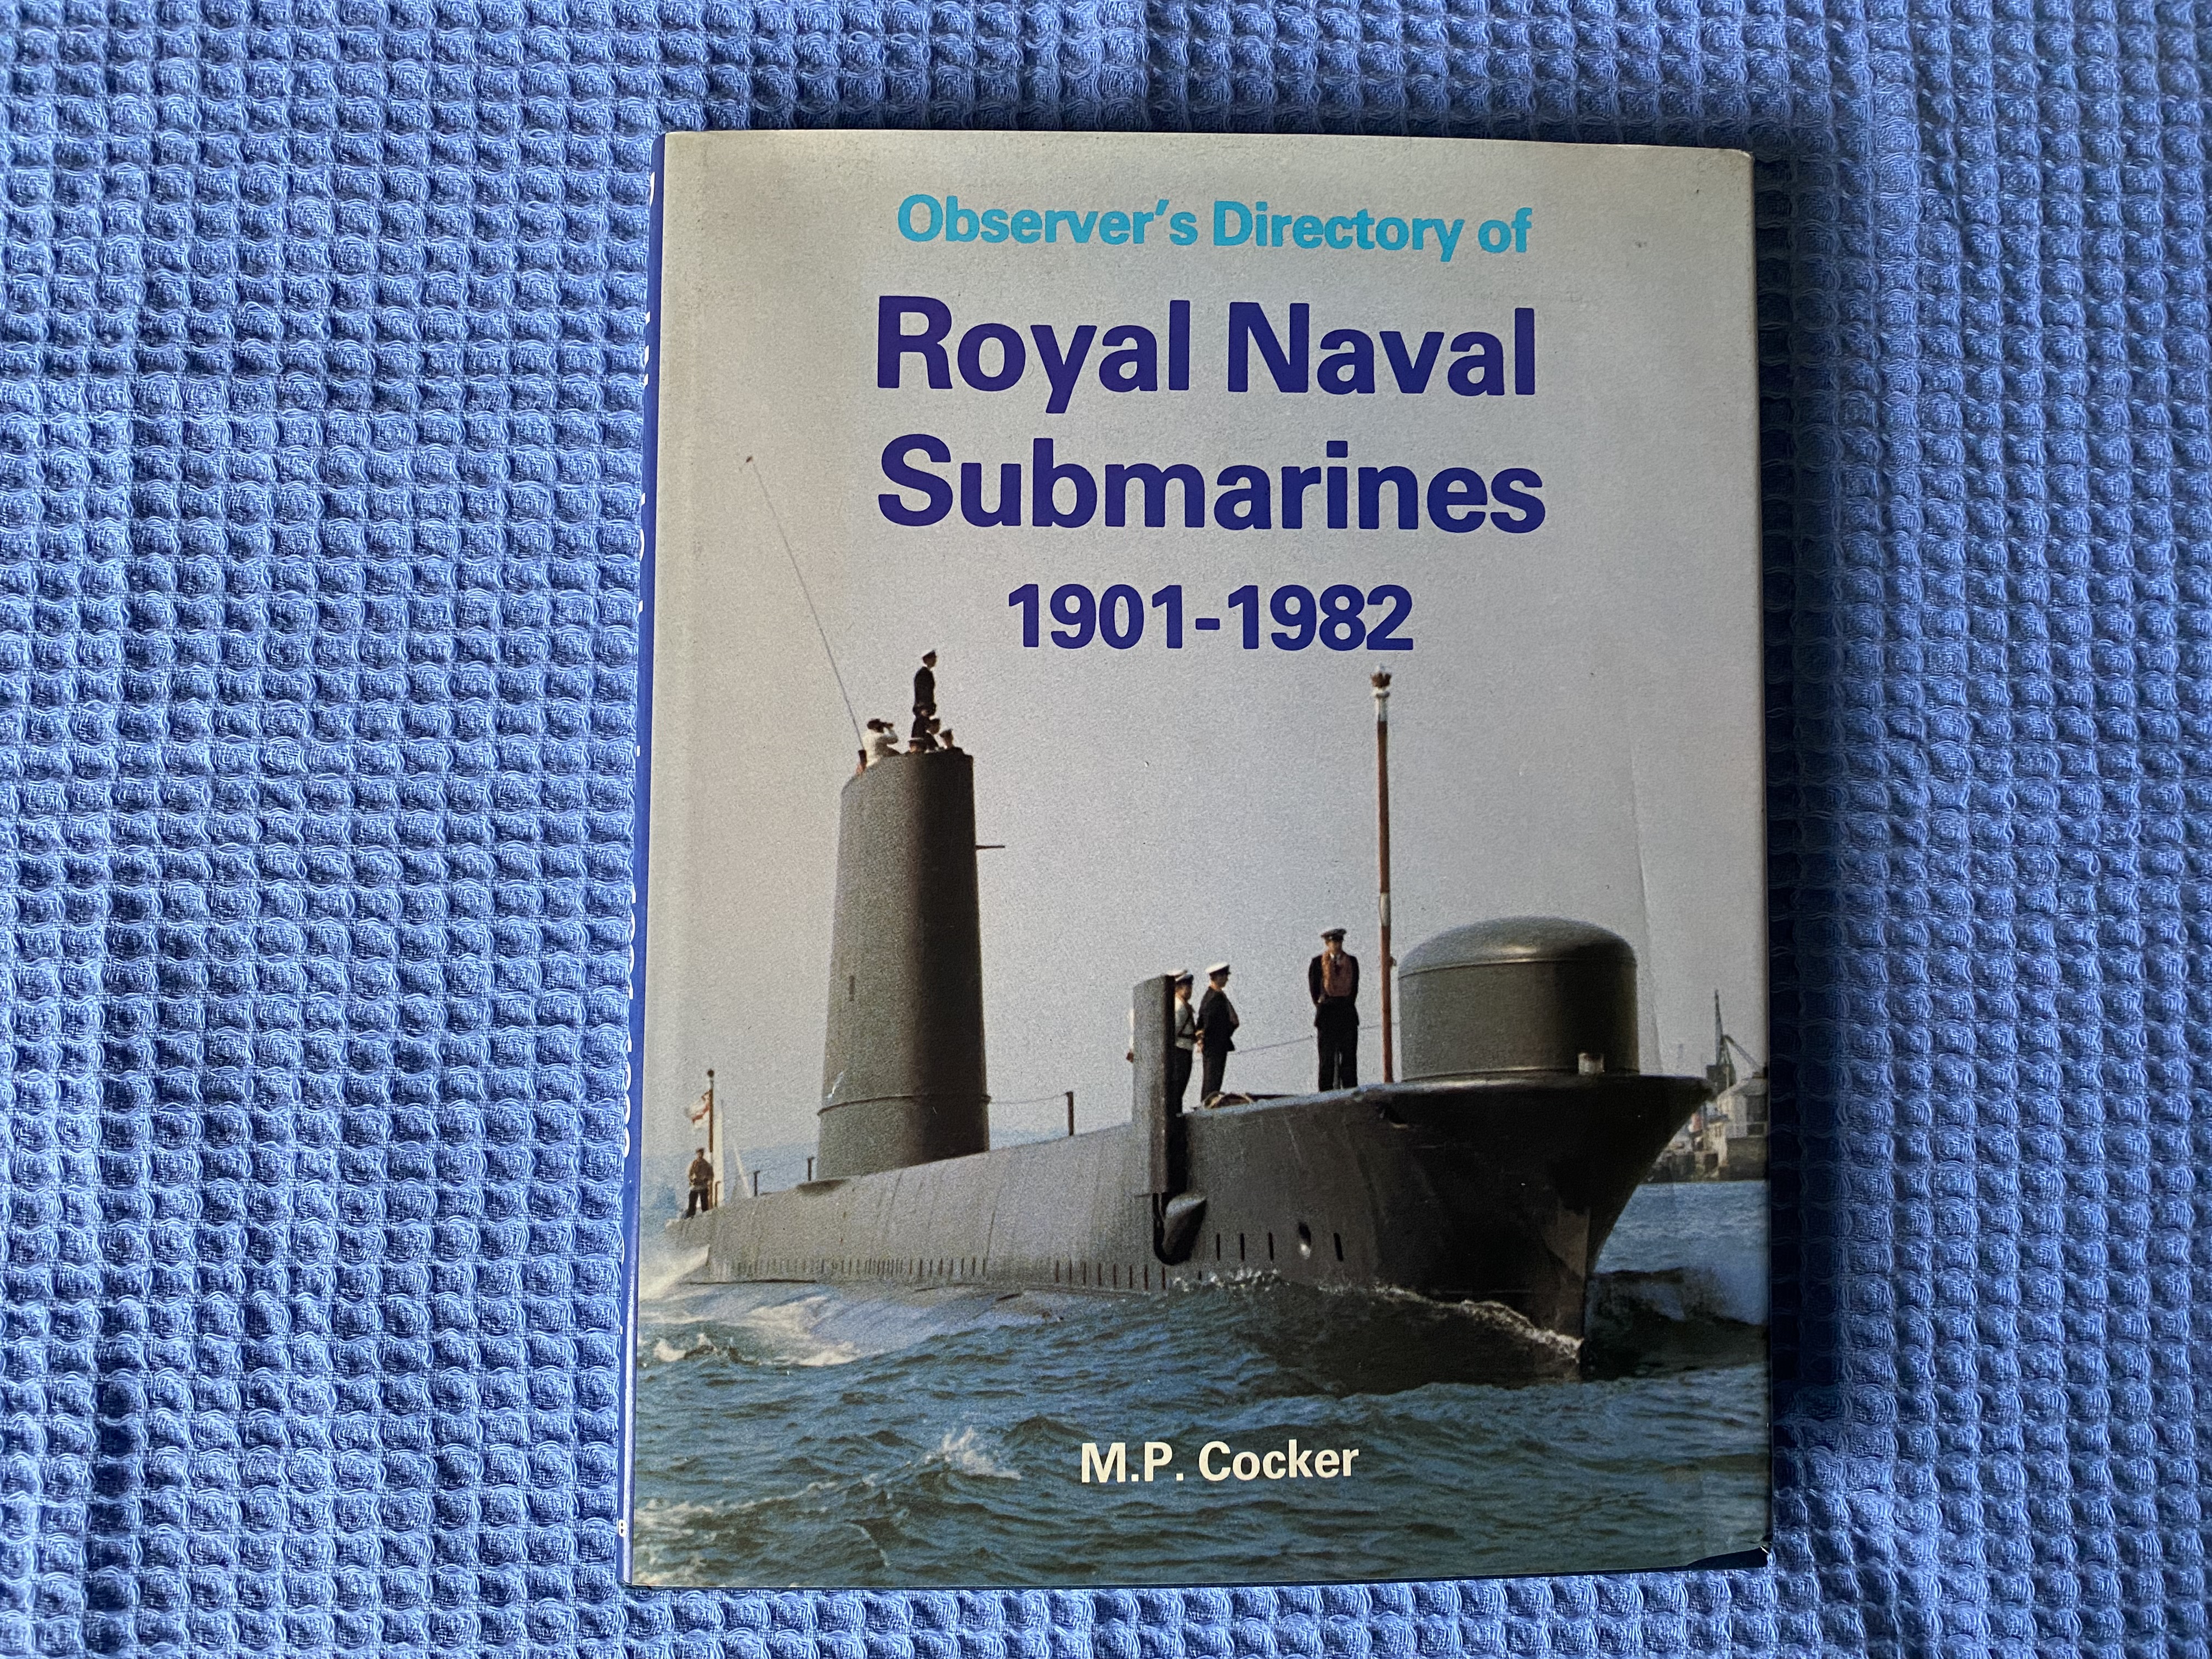 BOOK ENTITLED OBSERVER’S DIRECTORY OF ROYAL NAVAL SUBMARINES 1901-1982BY M.P. COCKER